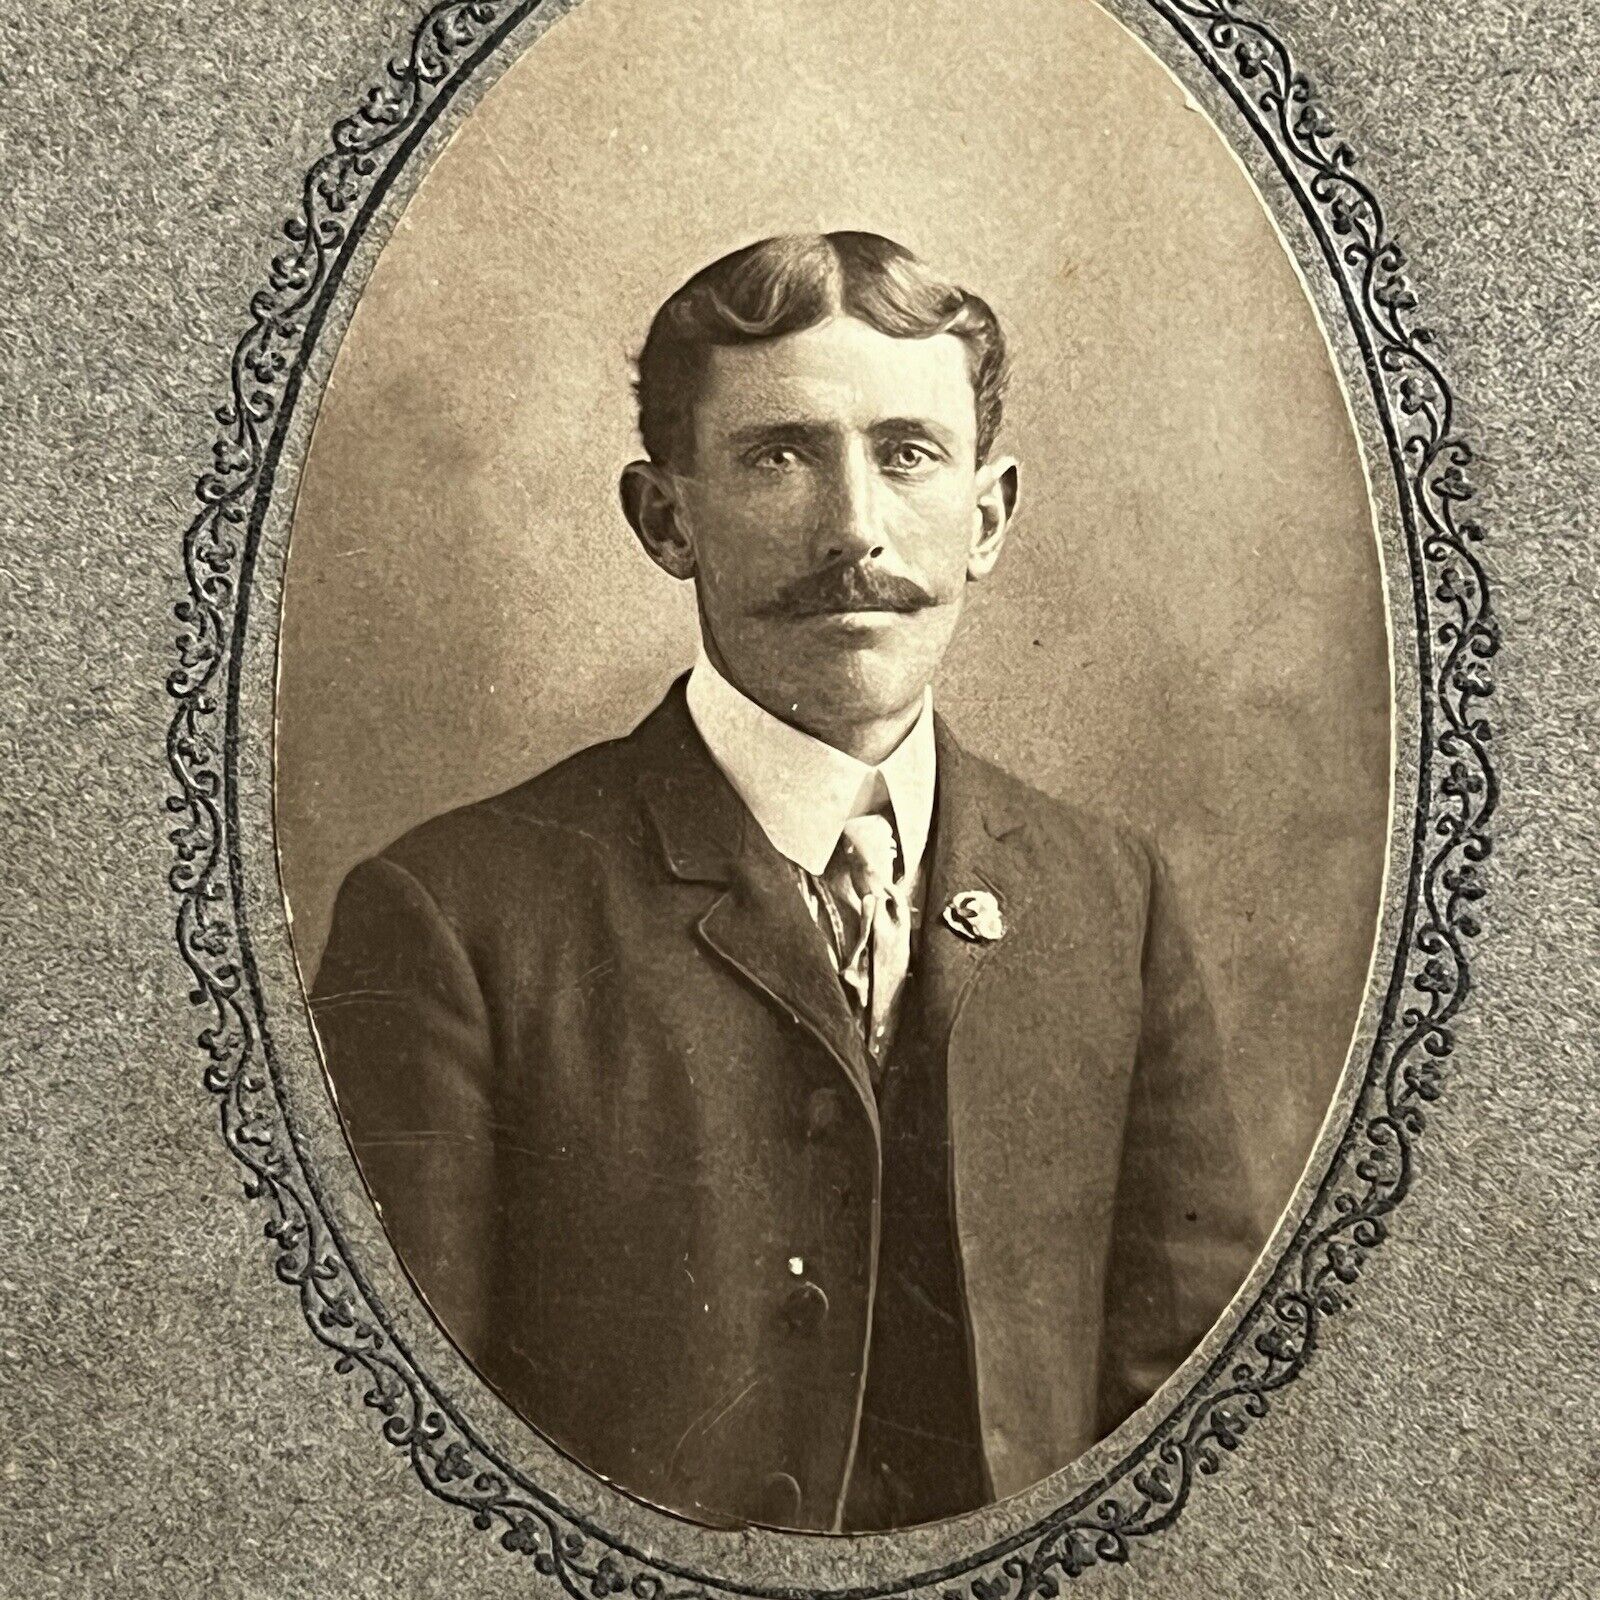 Antique Cabinet Card Photograph Handsome Man Mustache Great Hair Suit Tie Pin